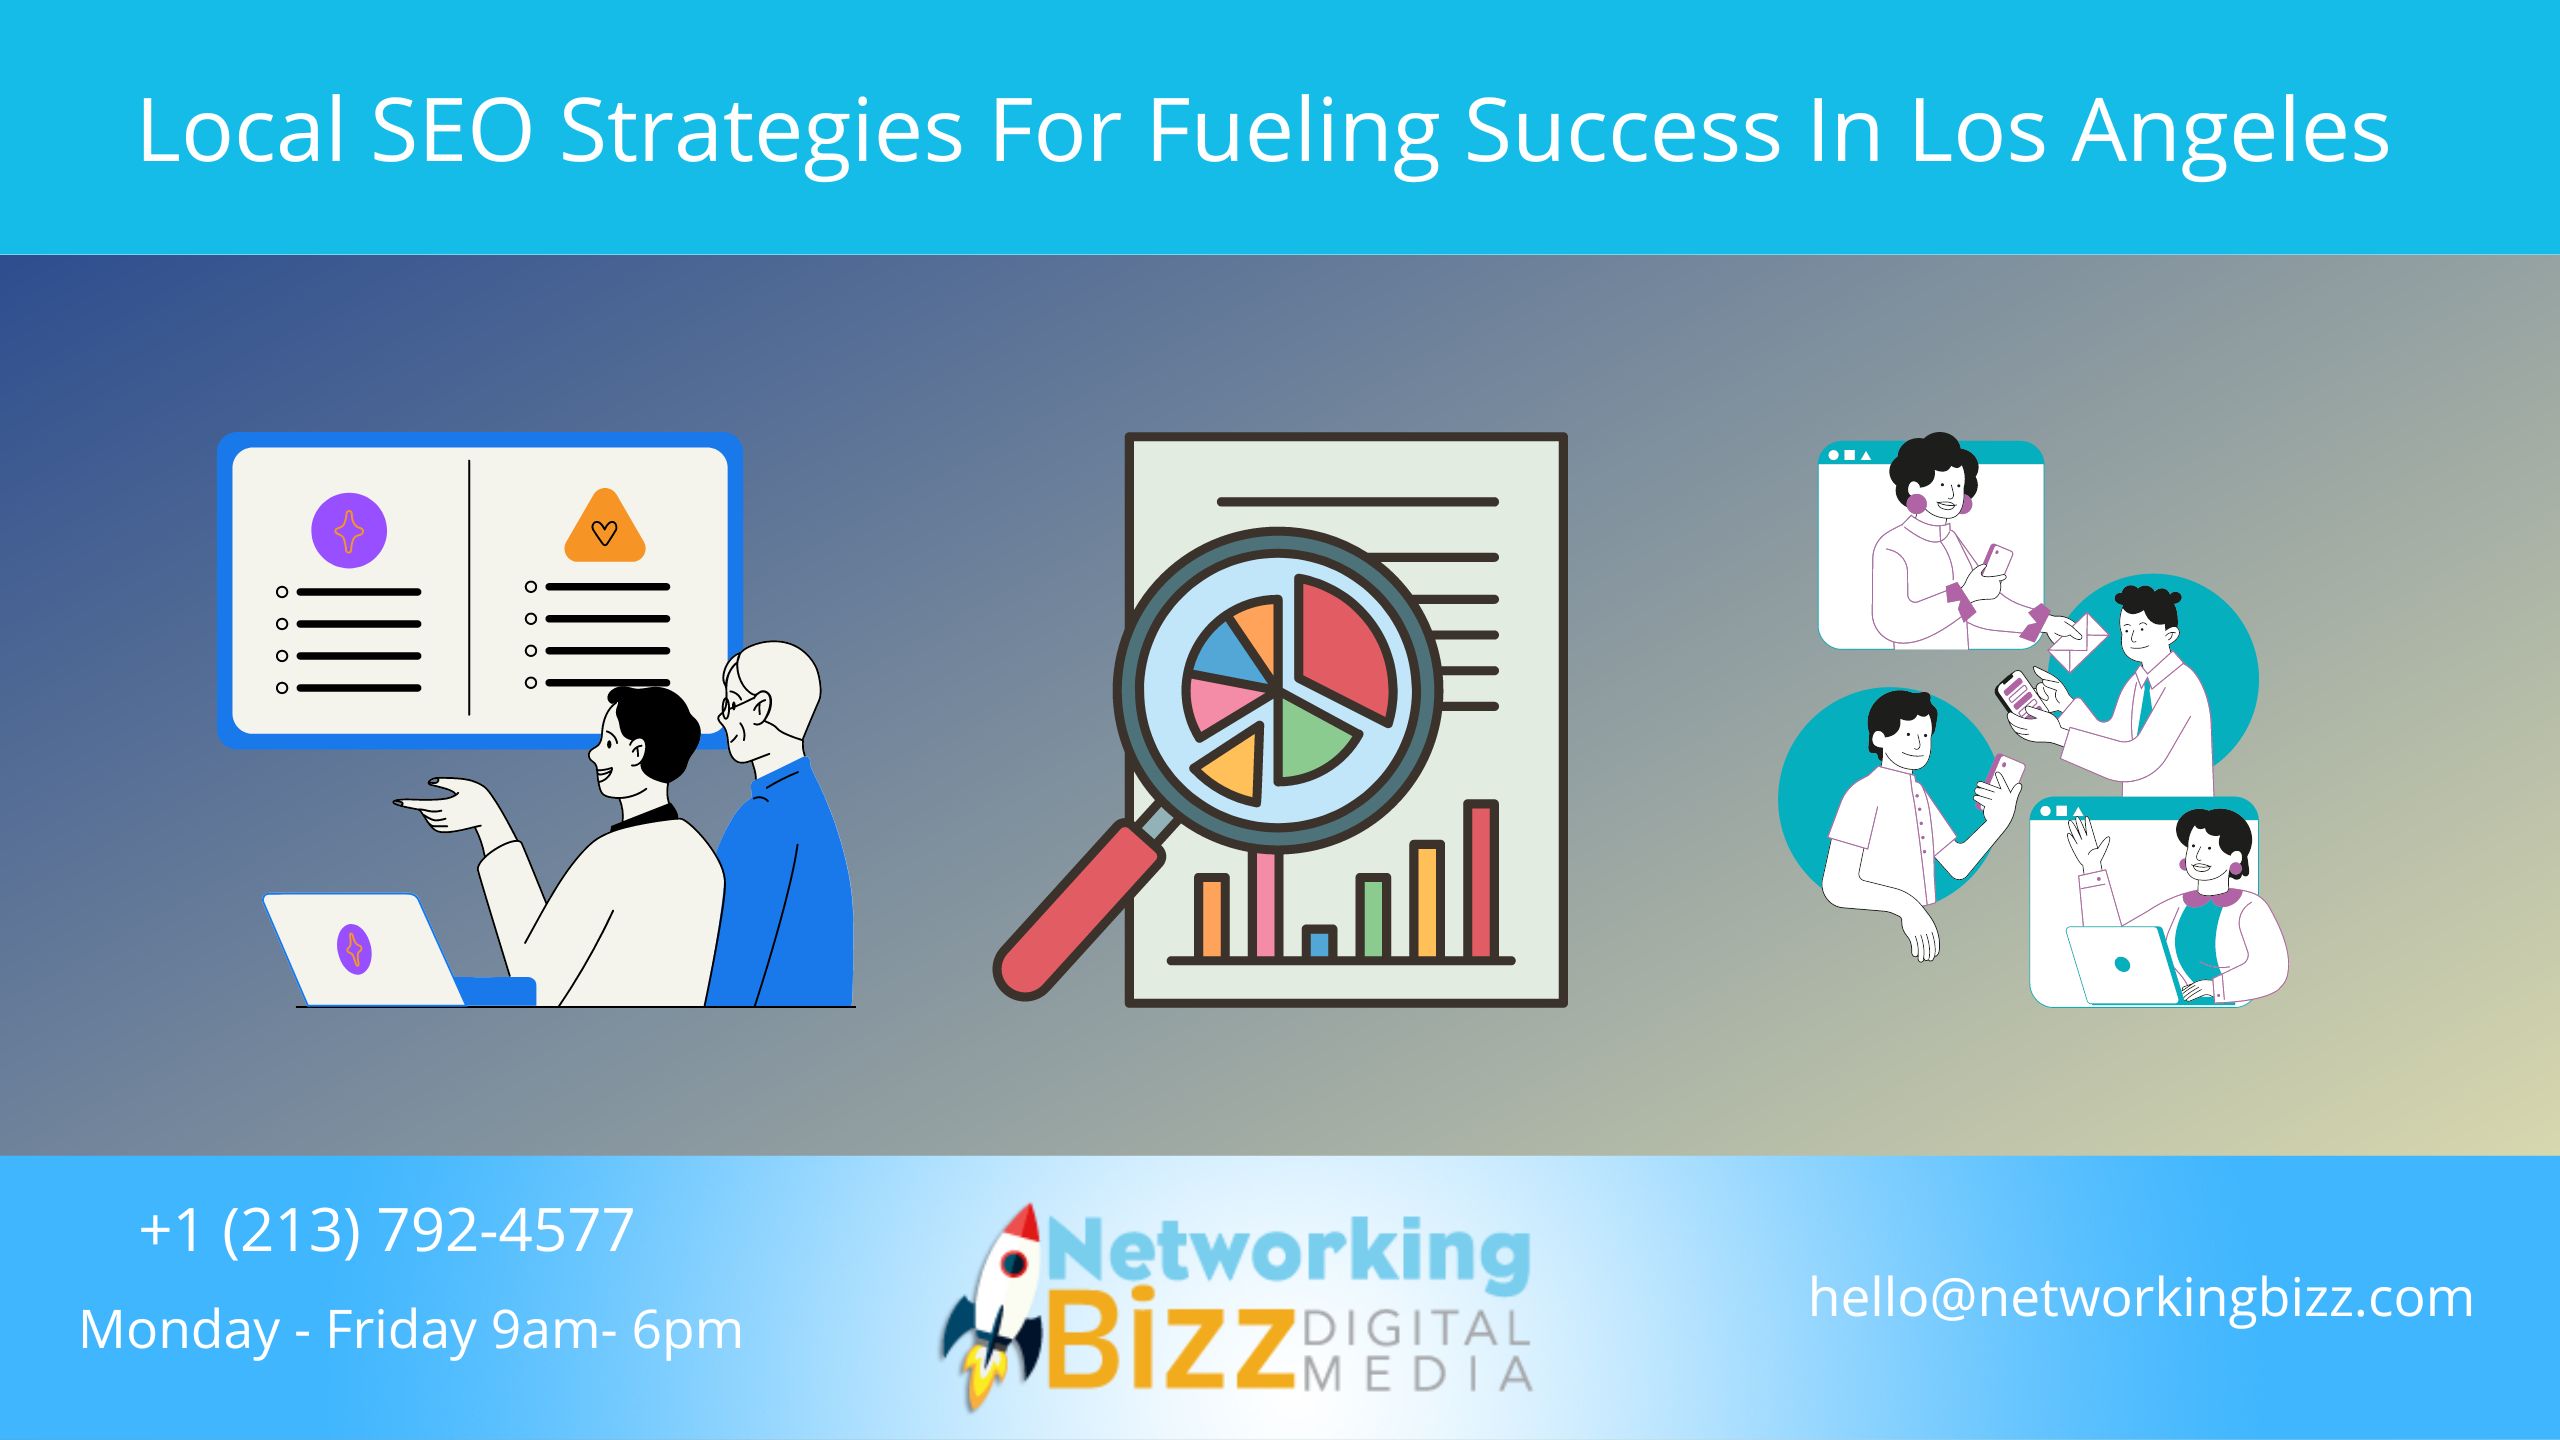 Local SEO Strategies For Fueling Success In Los Angeles